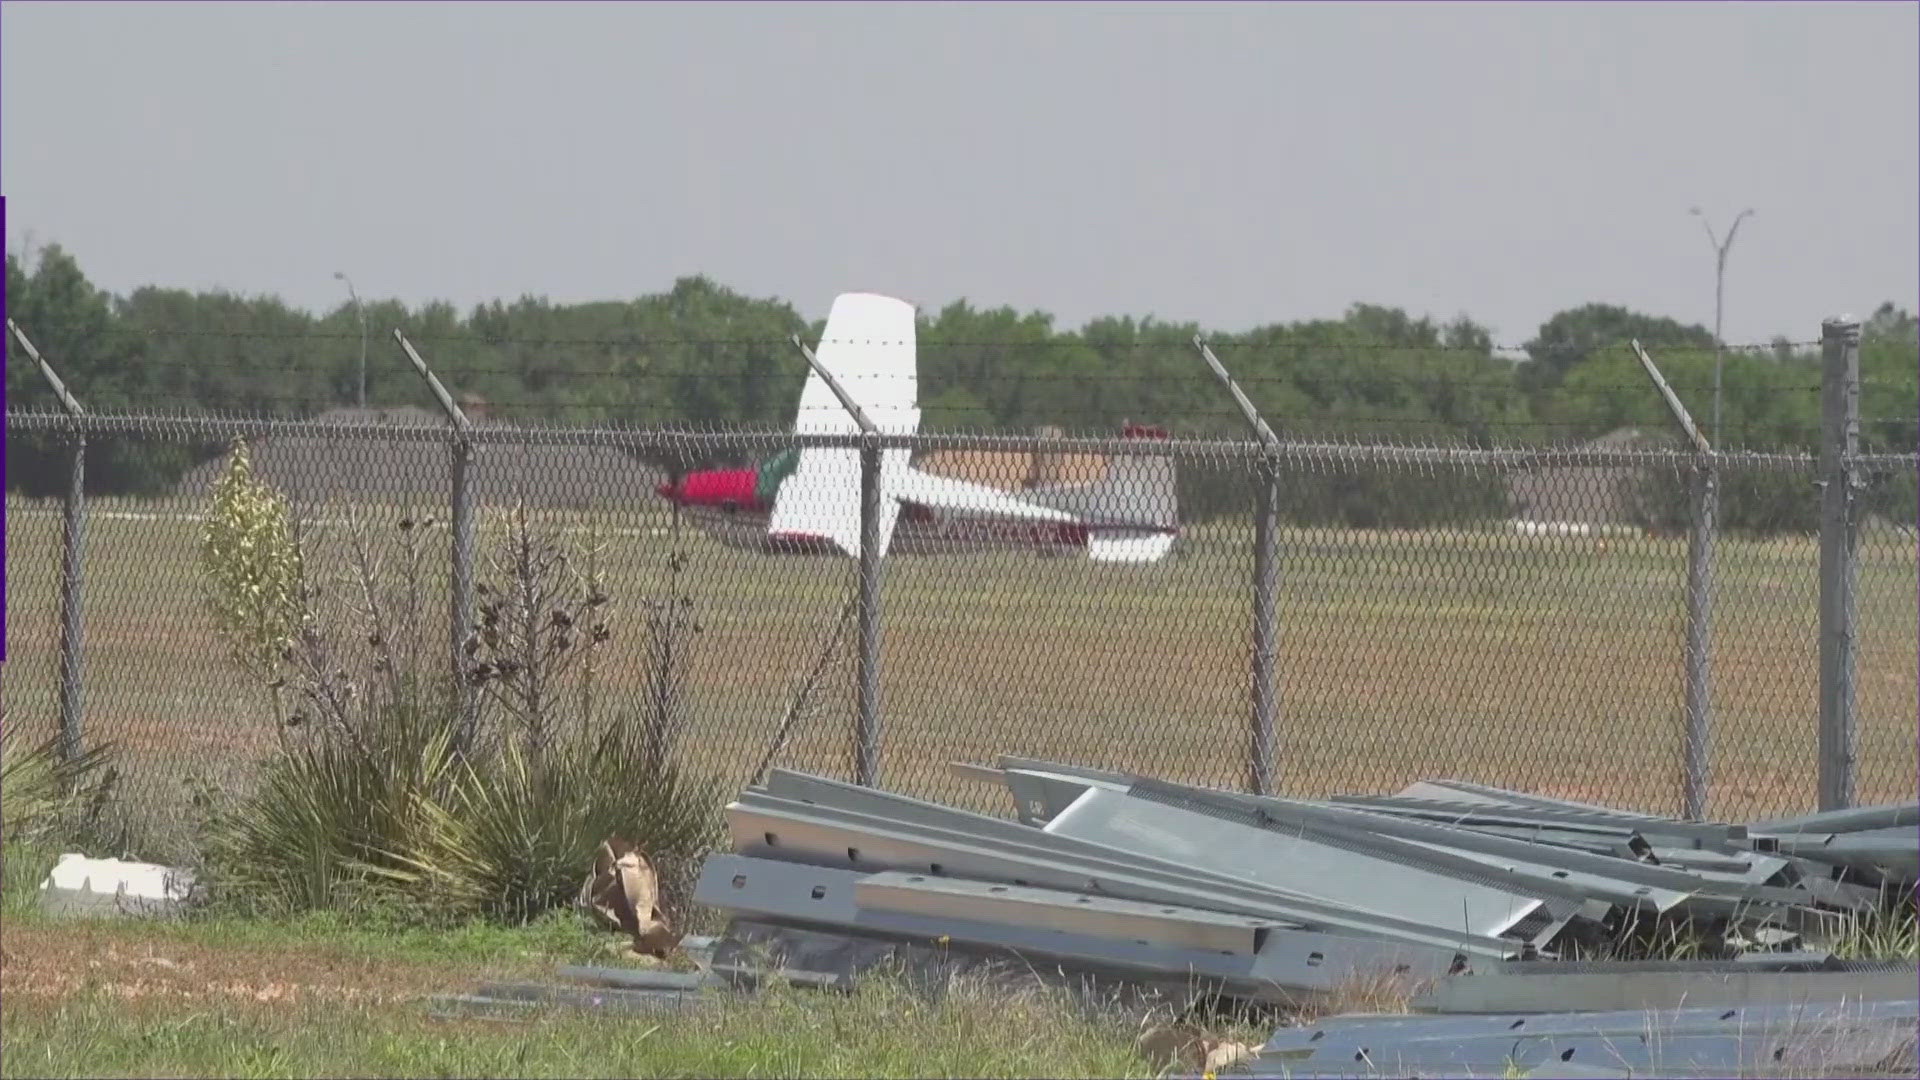 The hard landing was allegedly a result of the wingtip catching the ground and spinning off the runway.